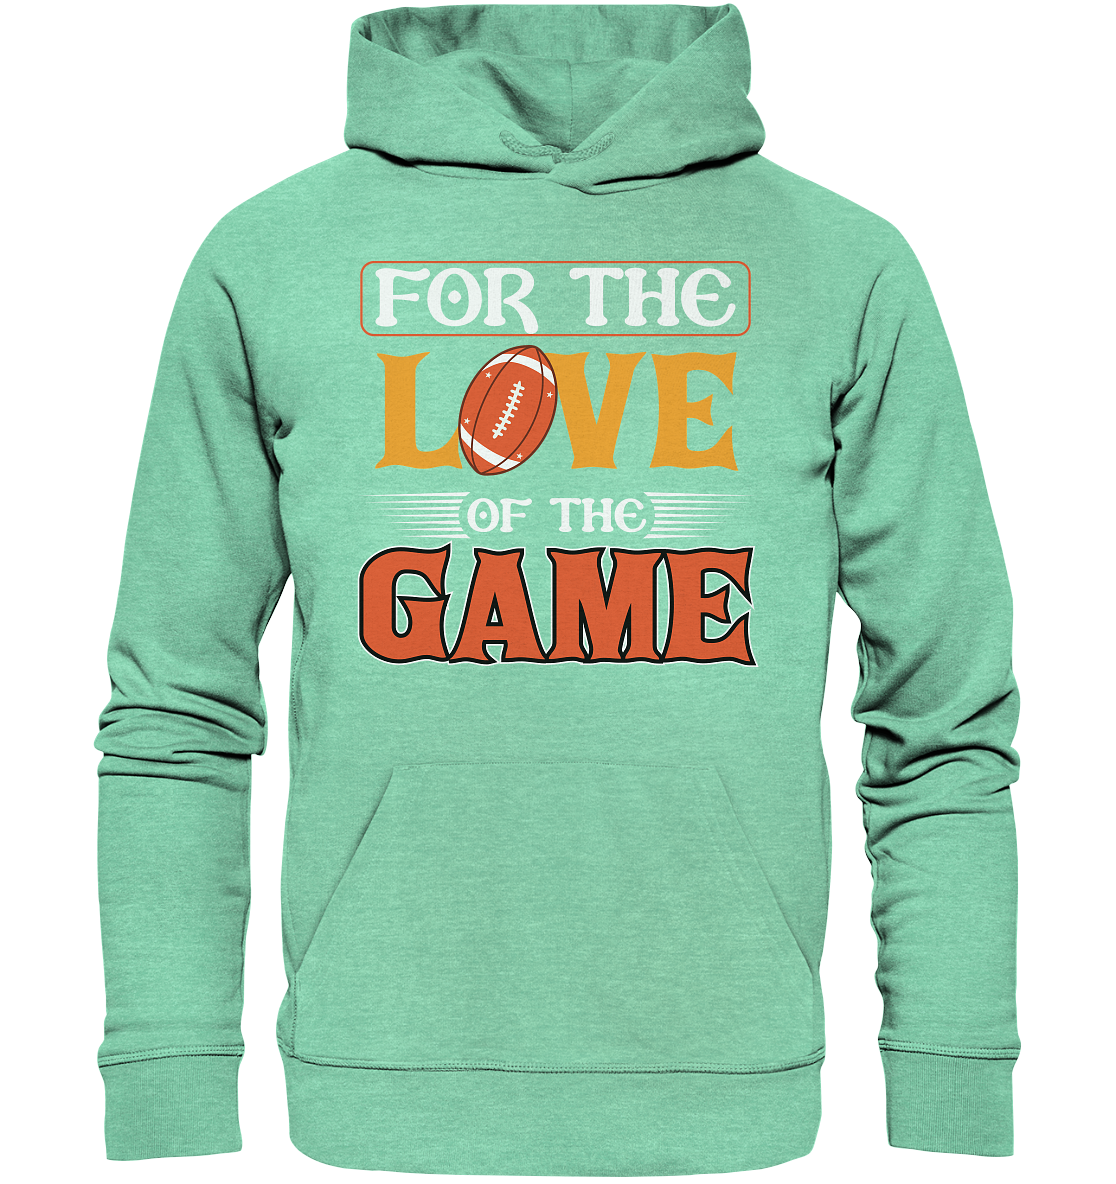 For the Love of the Game - Organic Hoodie - Football Unity Football Unity